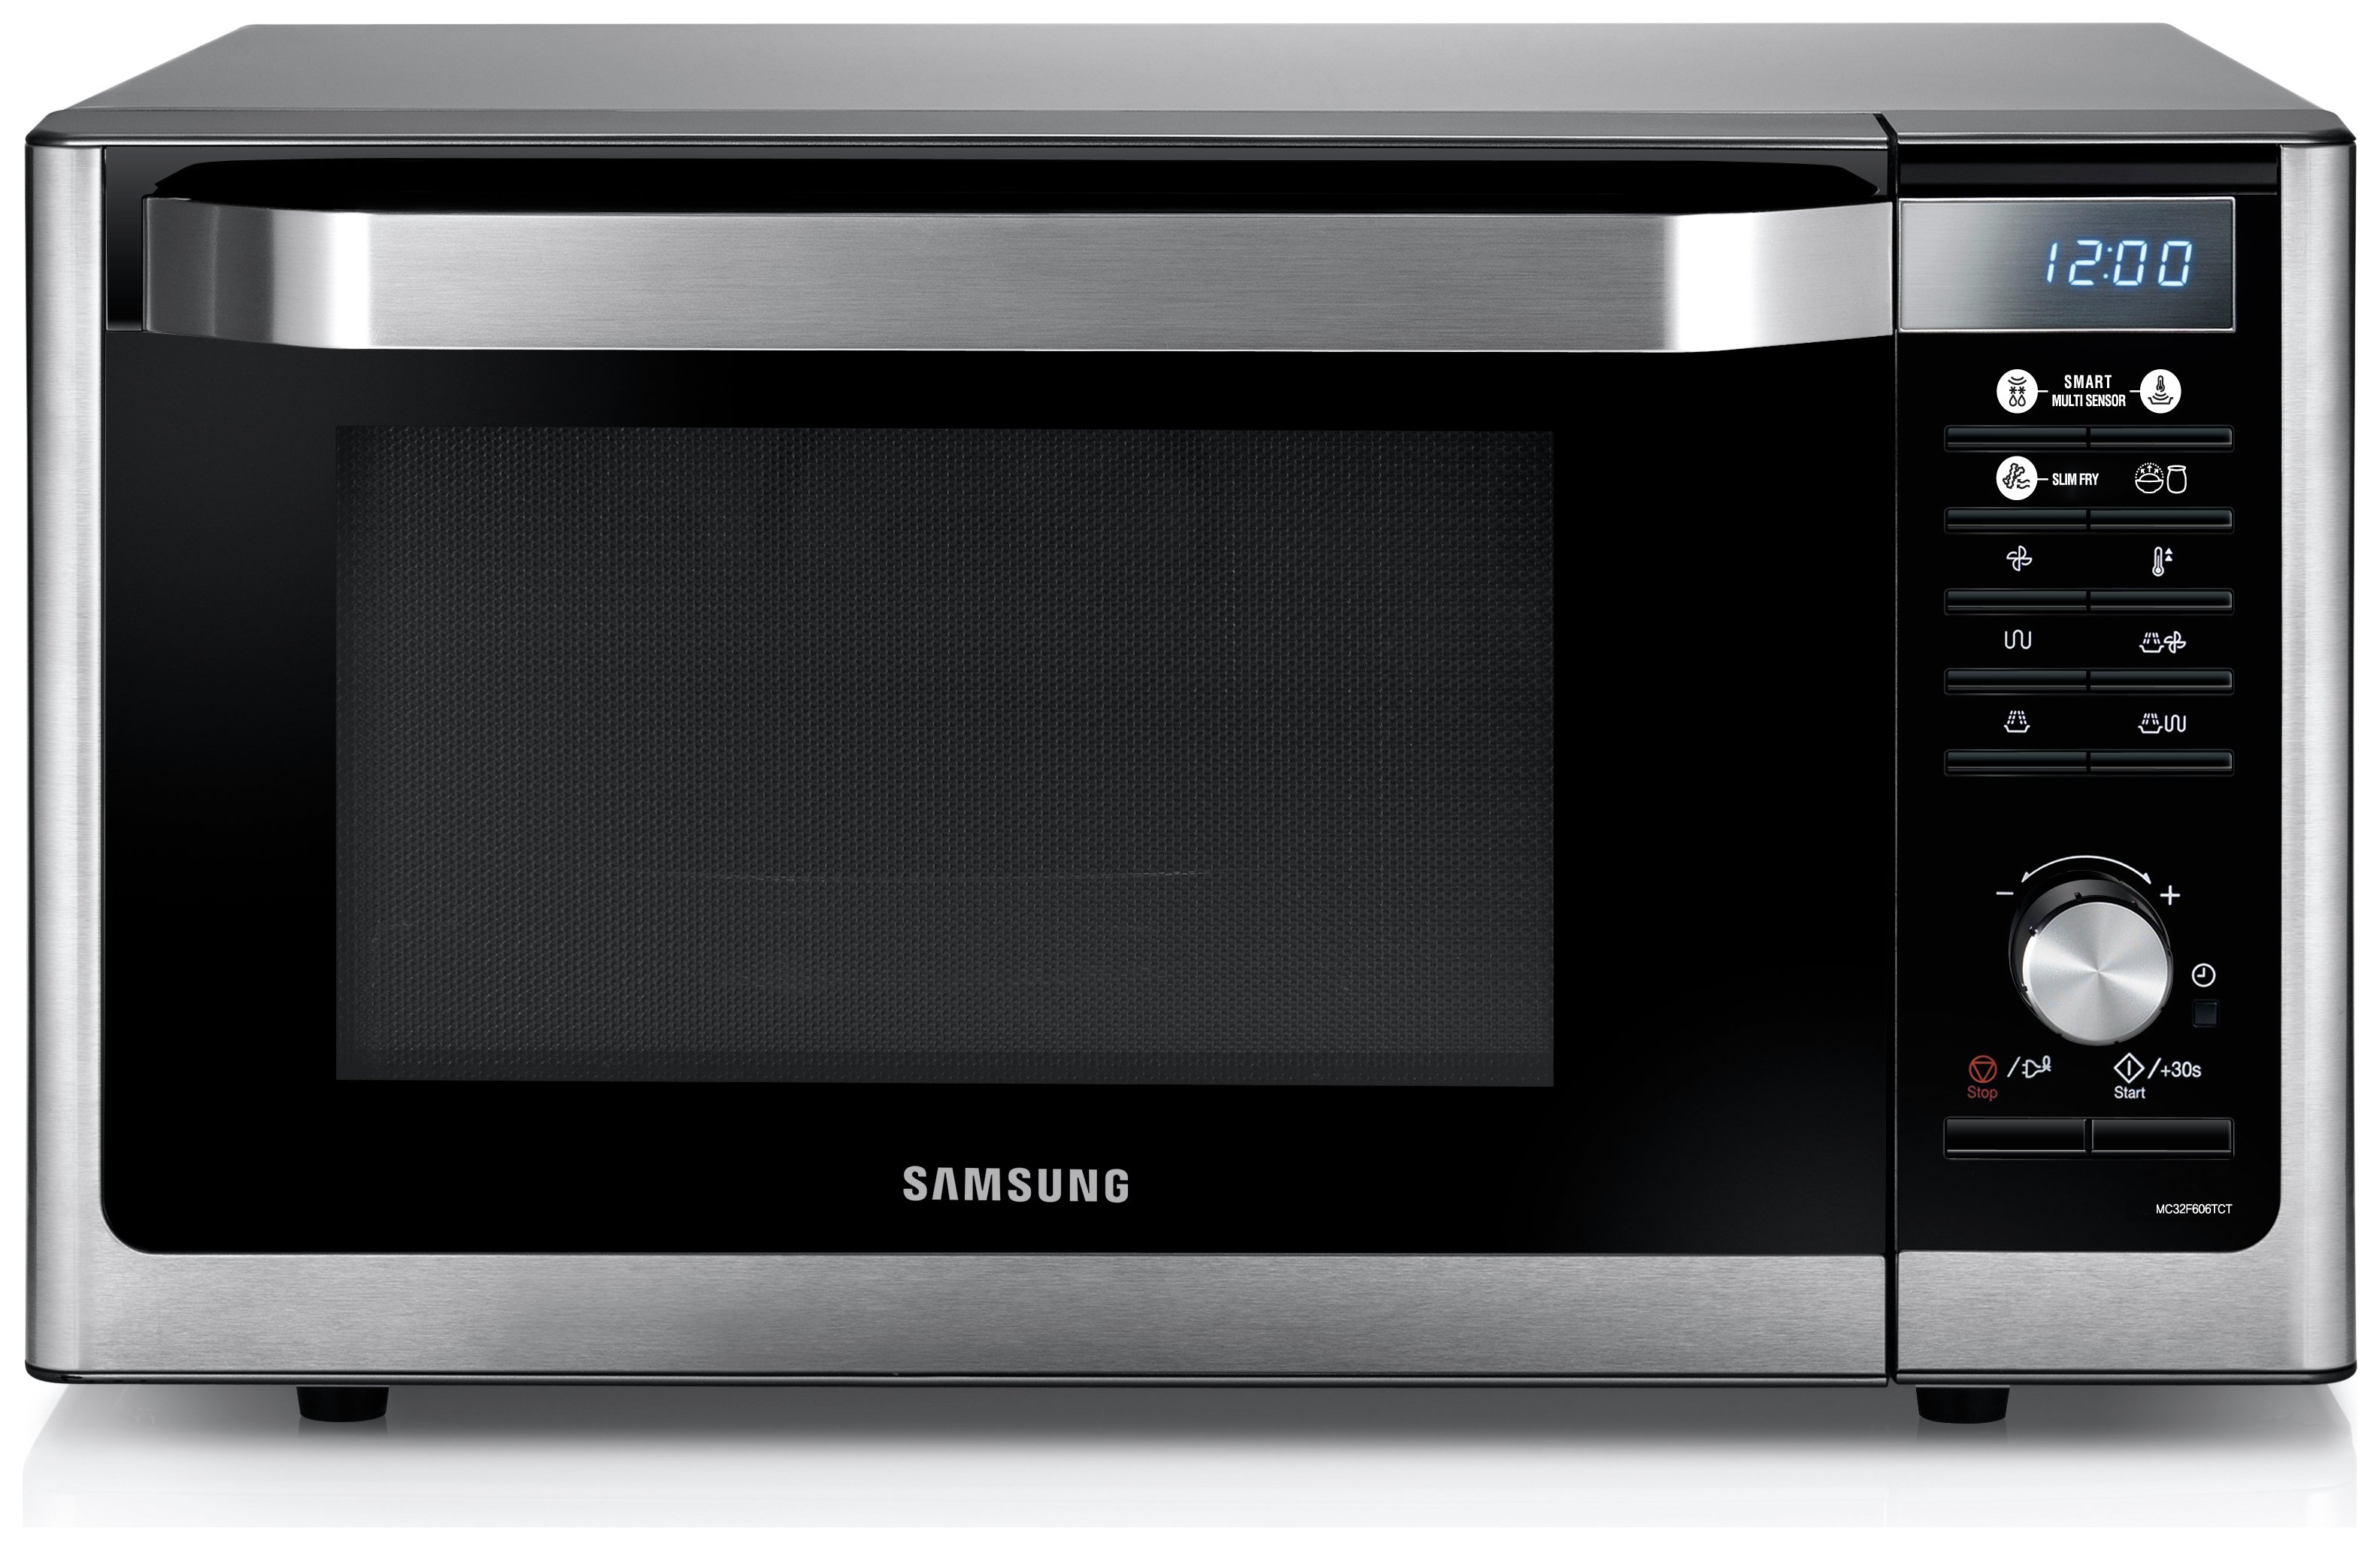 Samsung Microwave MC32F606TCT Smart Oven Stainless Steel Black